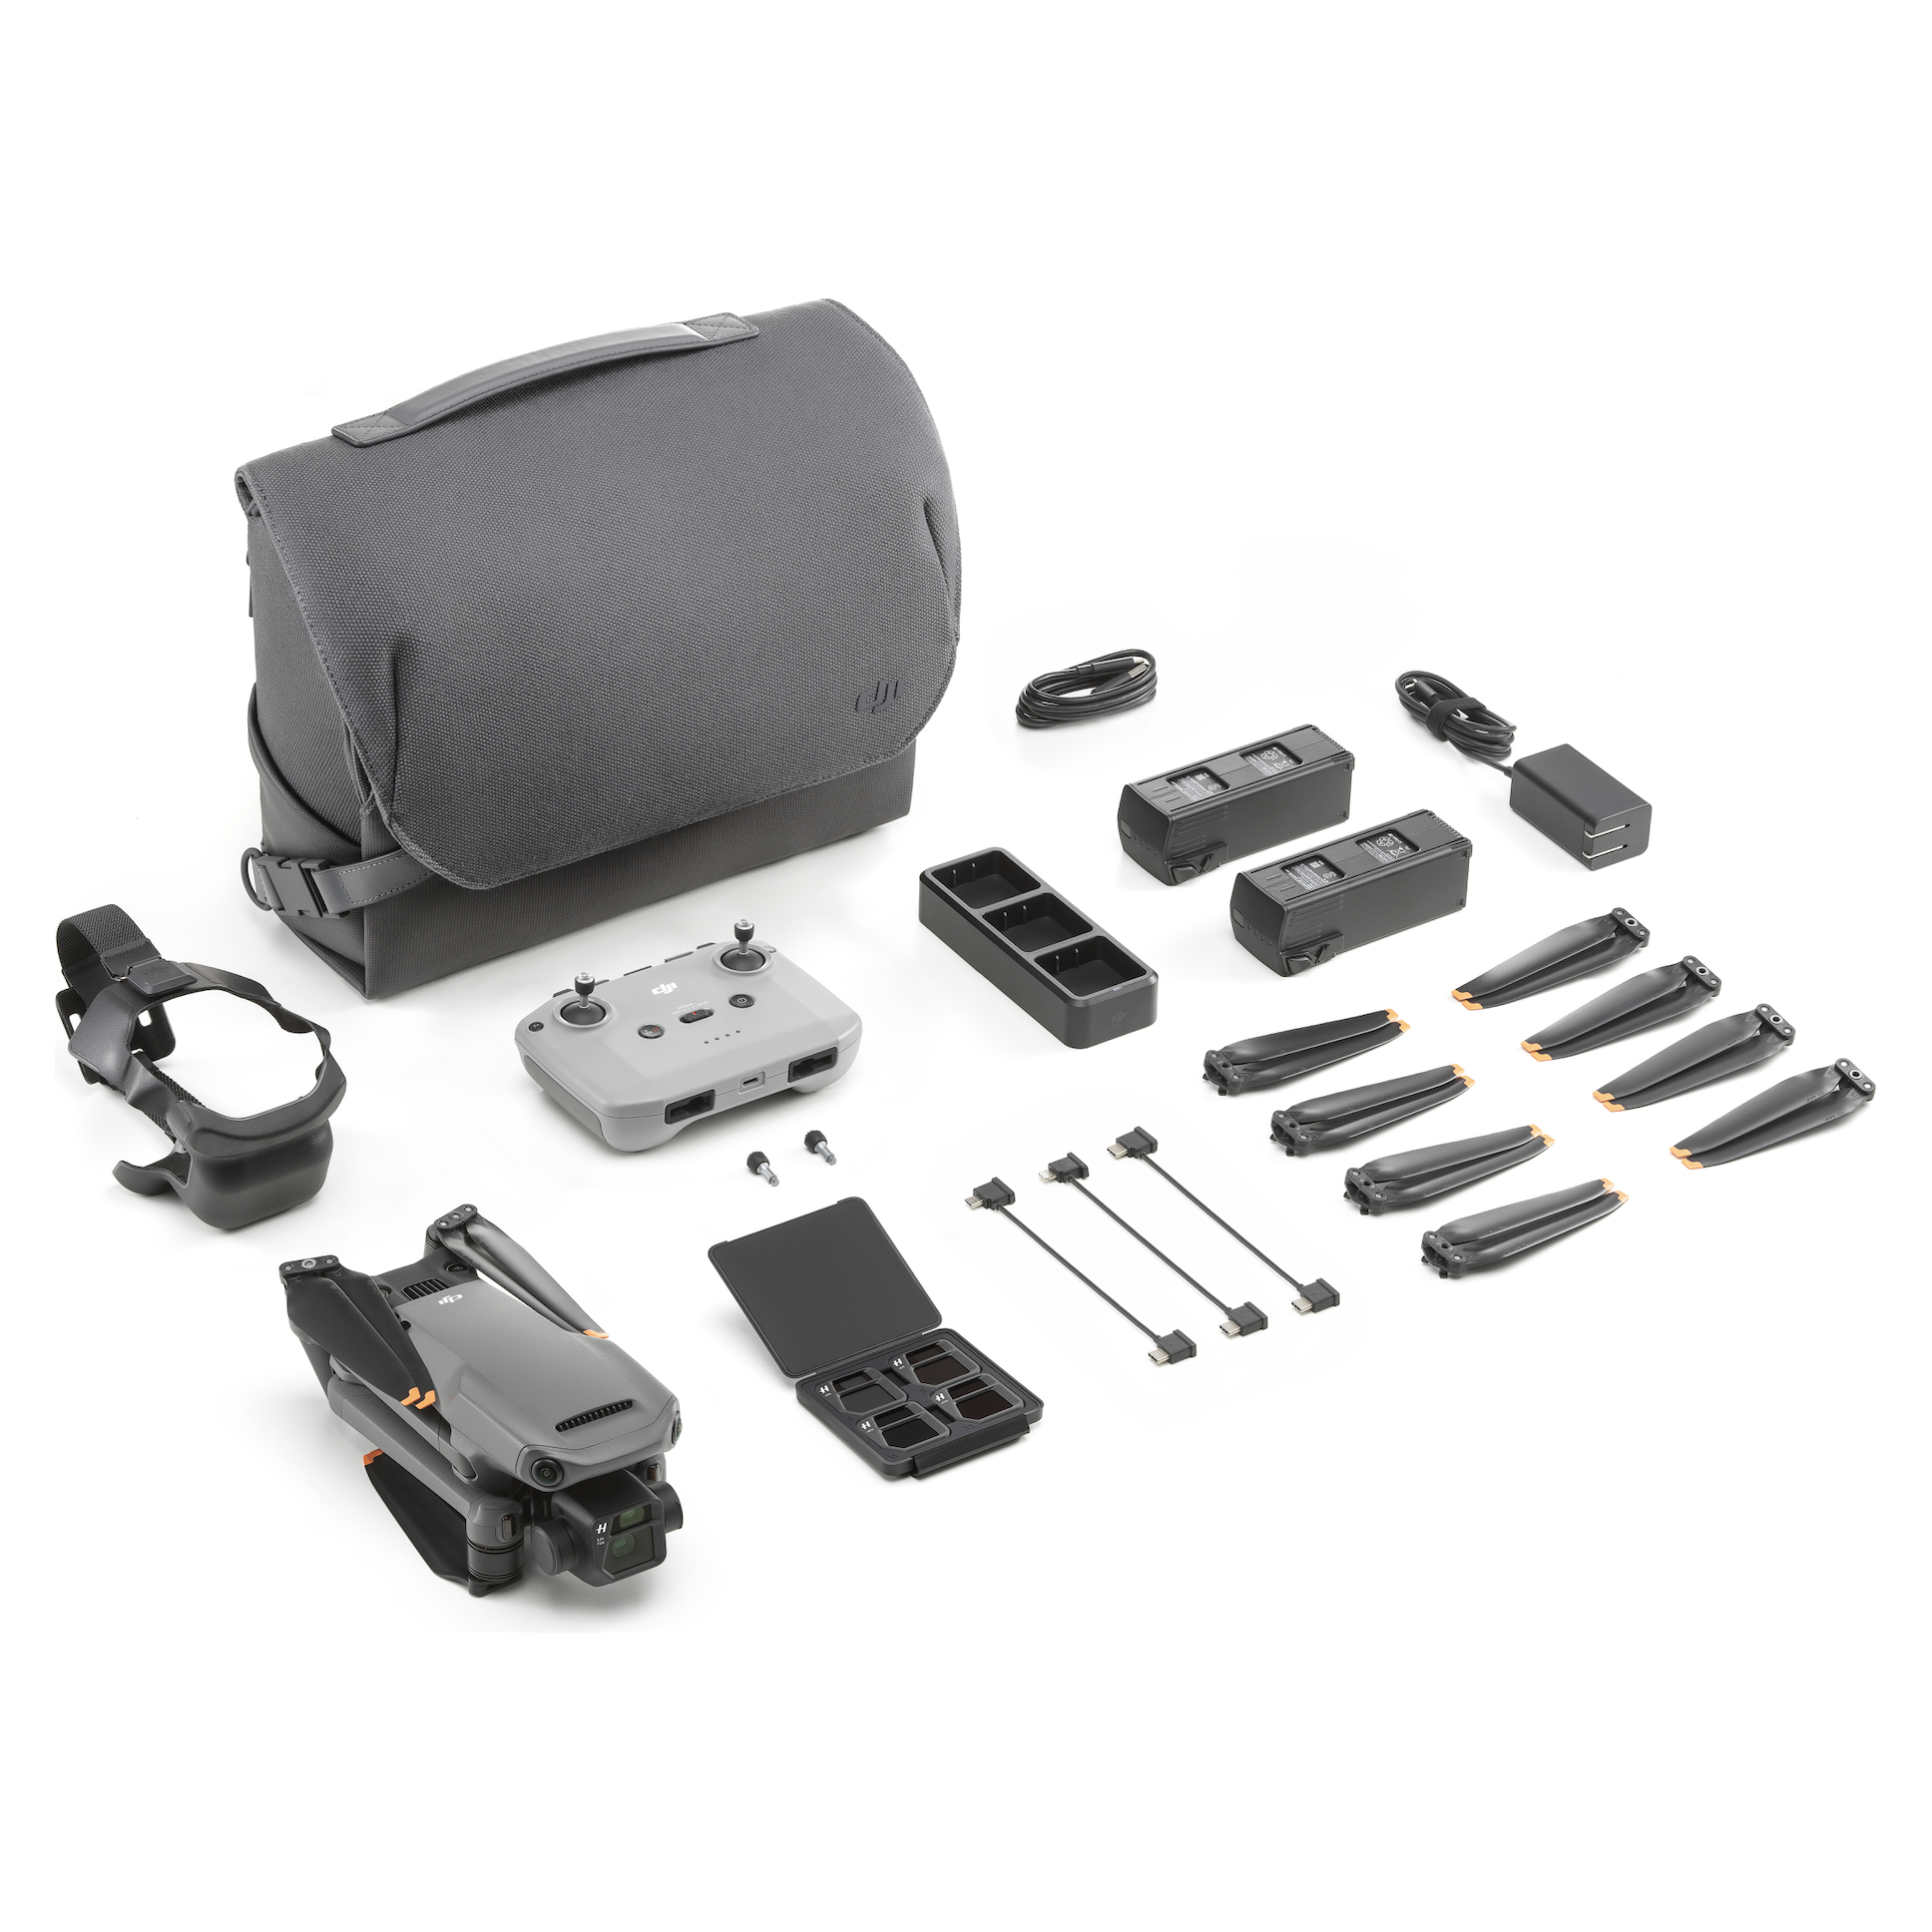 Best prices on DJI Mavic 3 Fly more combo in Canada